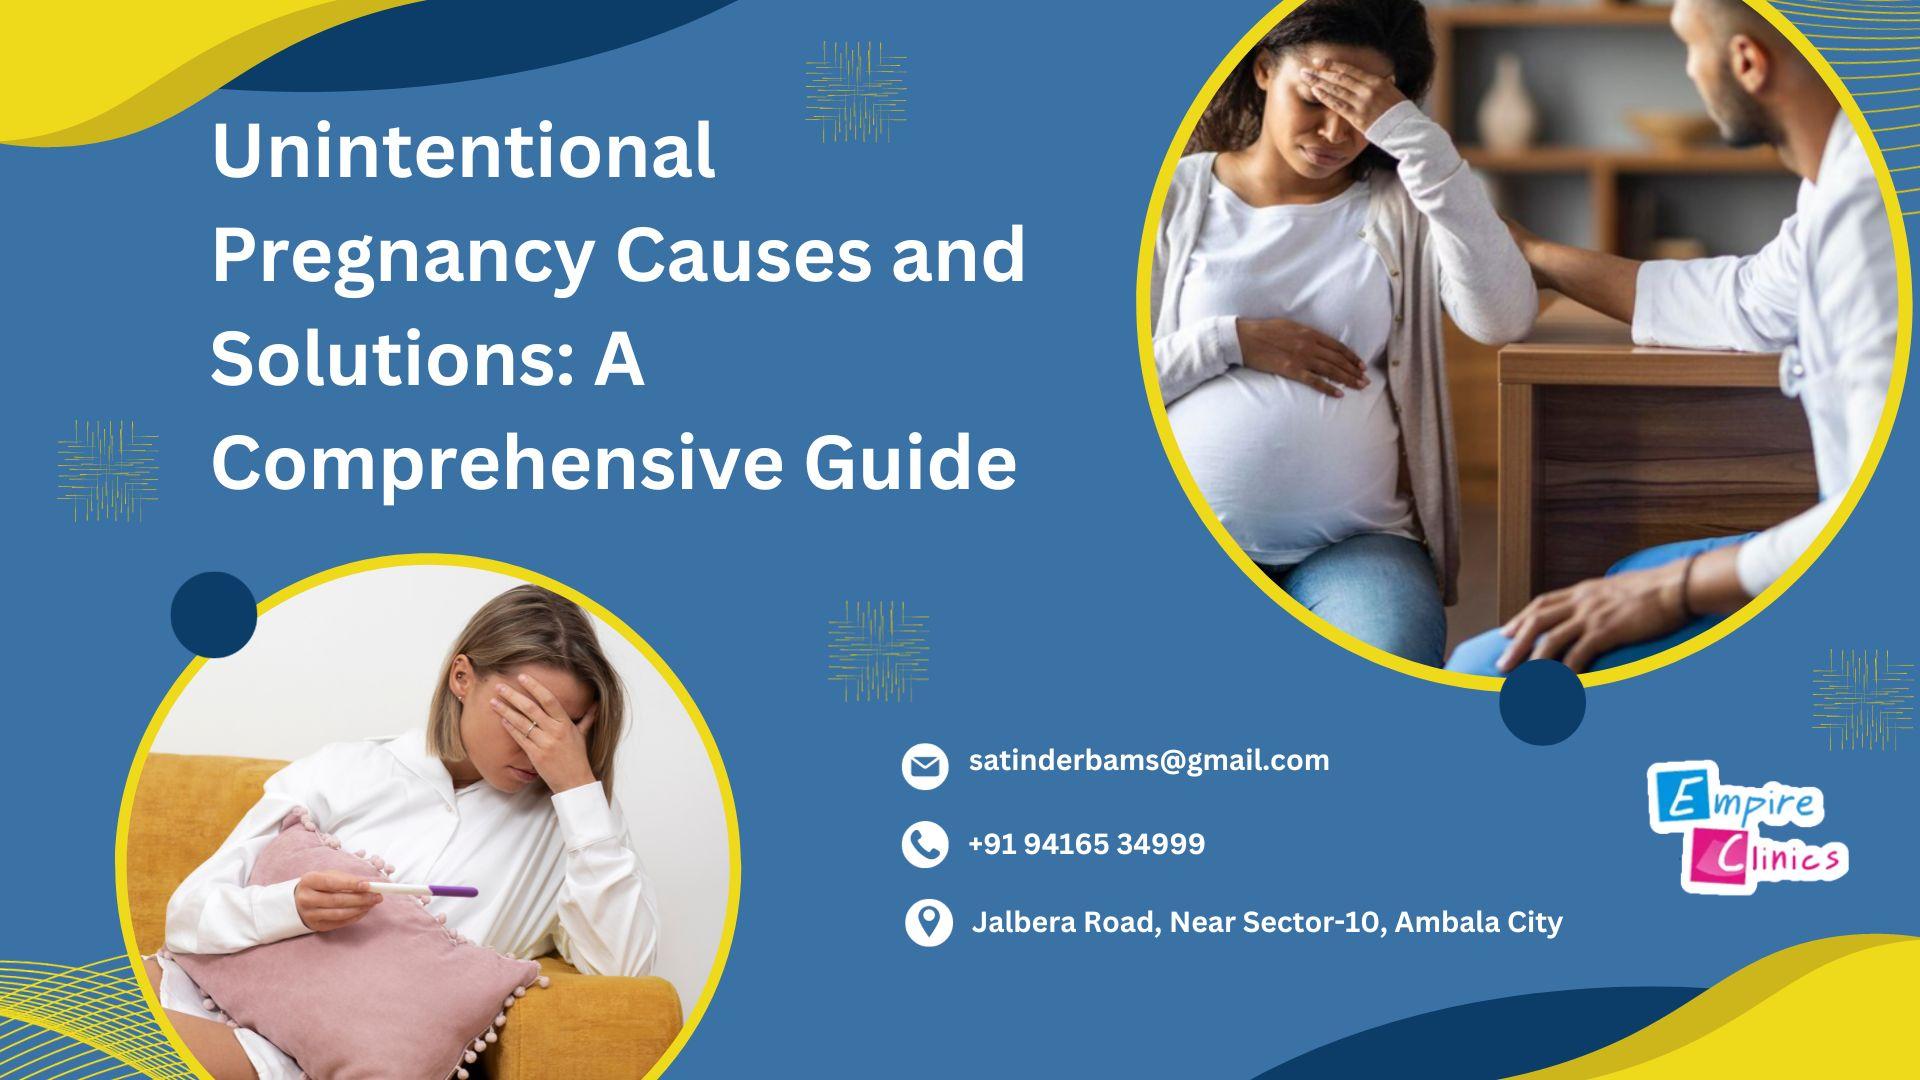 Unintentional Pregnancy Causes and Solutions: A Comprehensive Guide